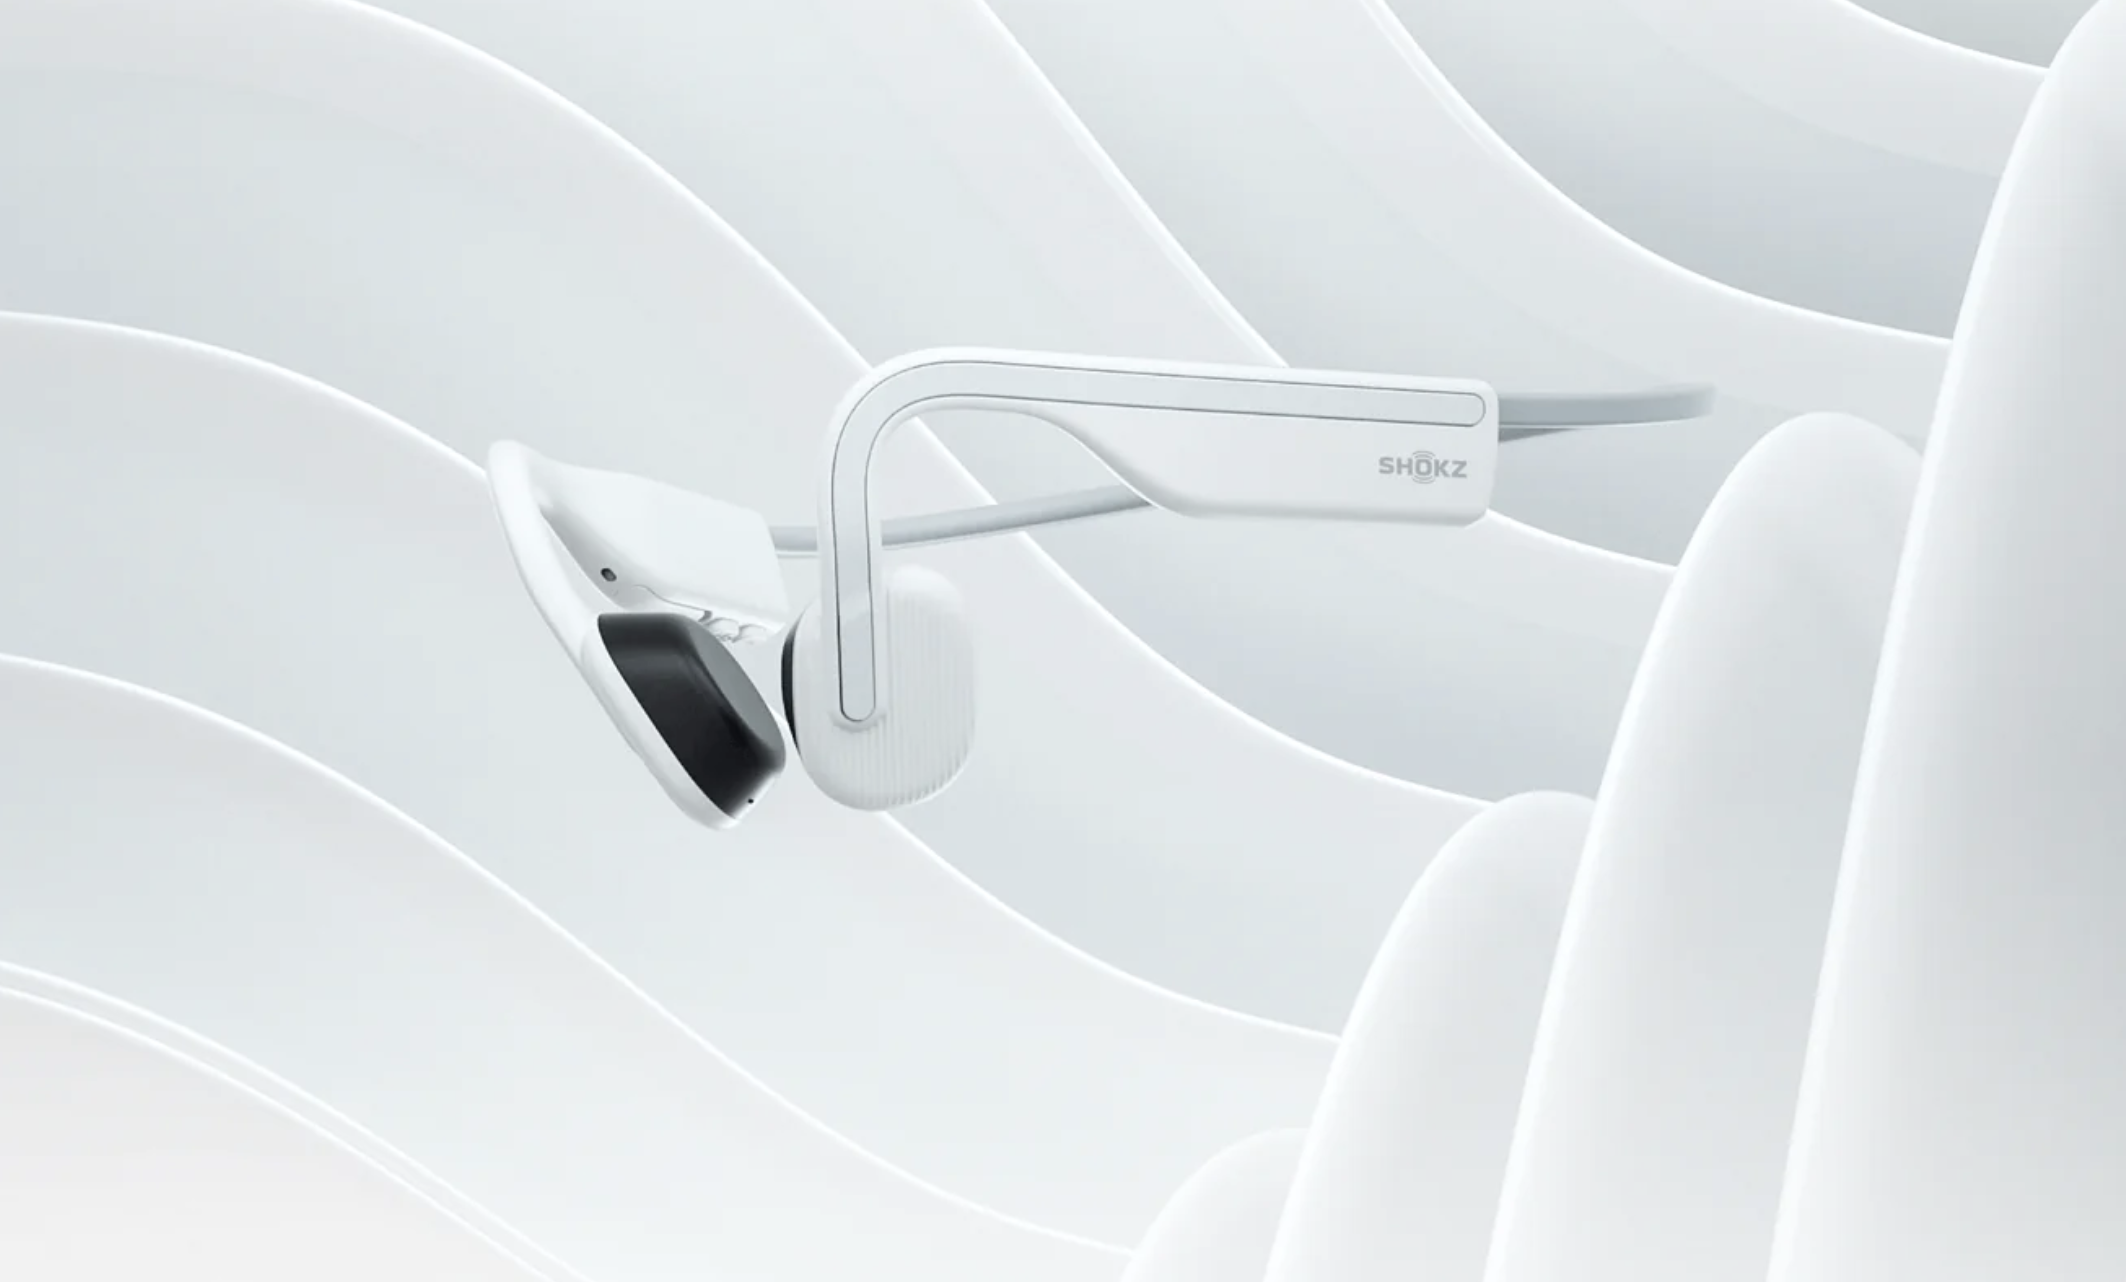 The Shokz OpenMove bone conduction headphones on a patterned background.